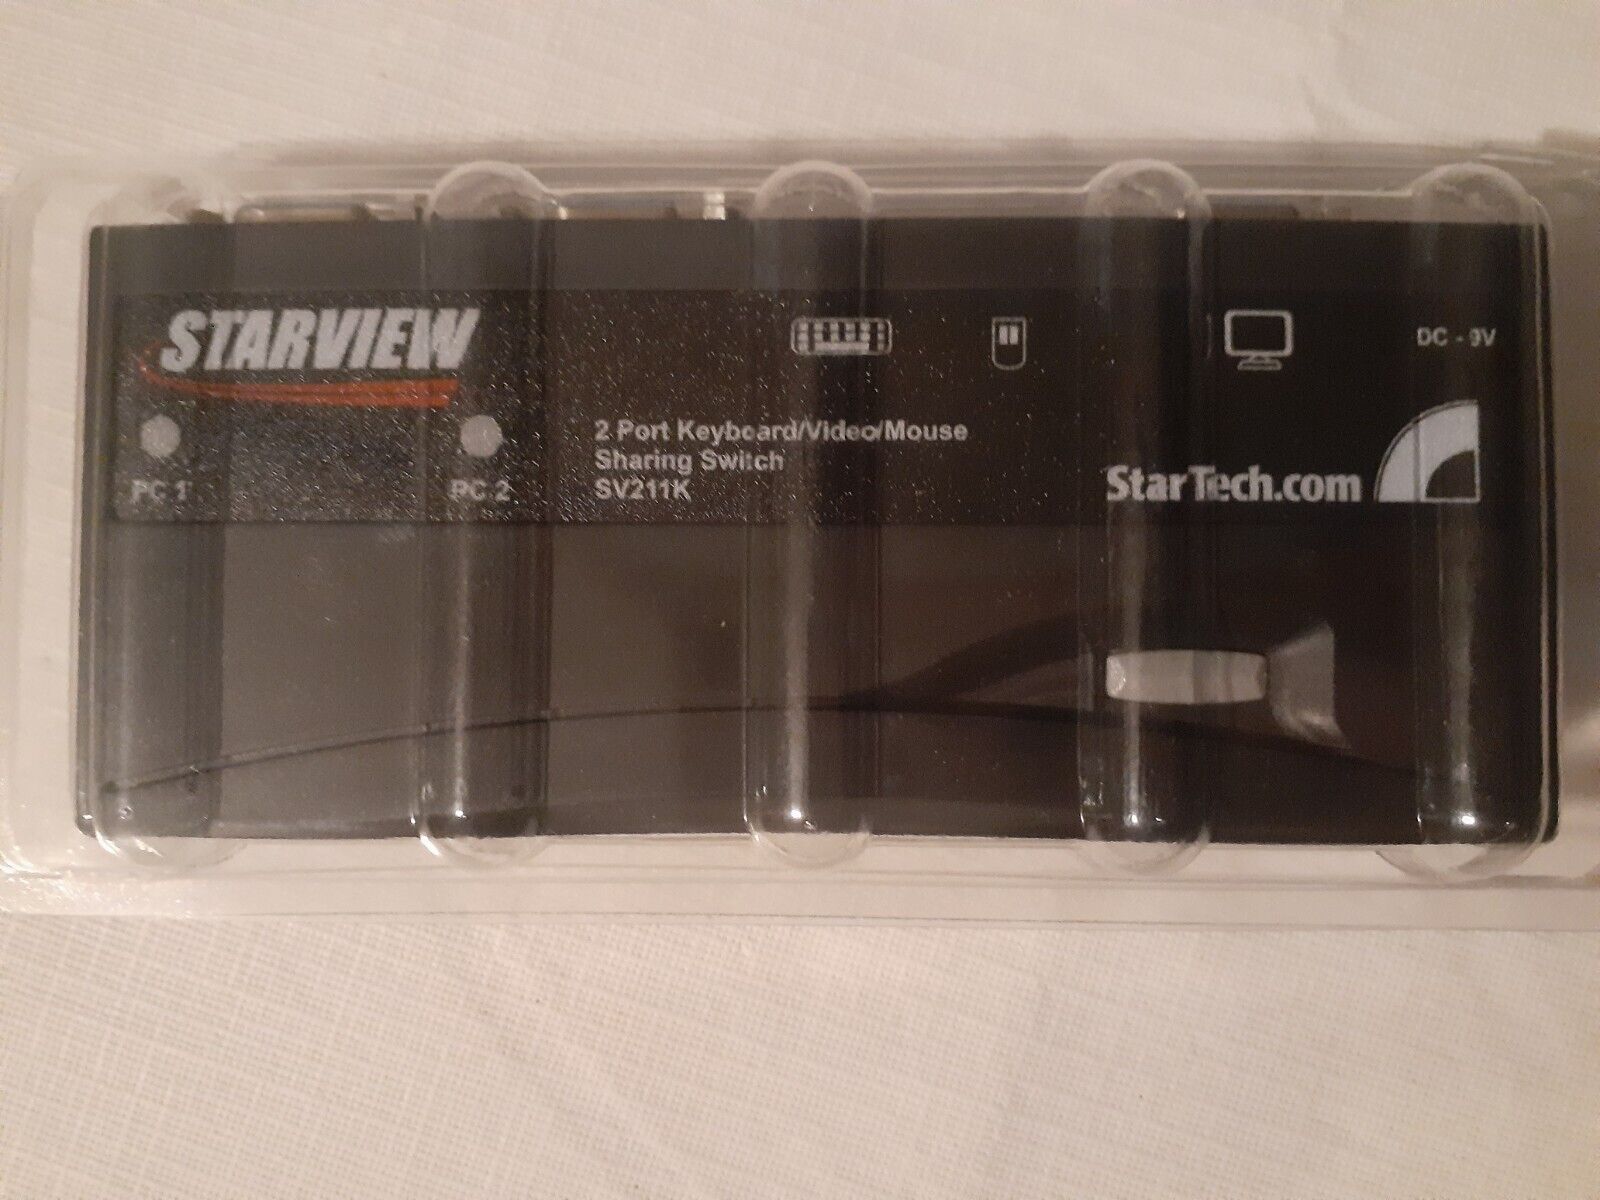 StarTech.com Starview SV211K 2 Port Keyboard/Video/Mouse Sharing Switch 